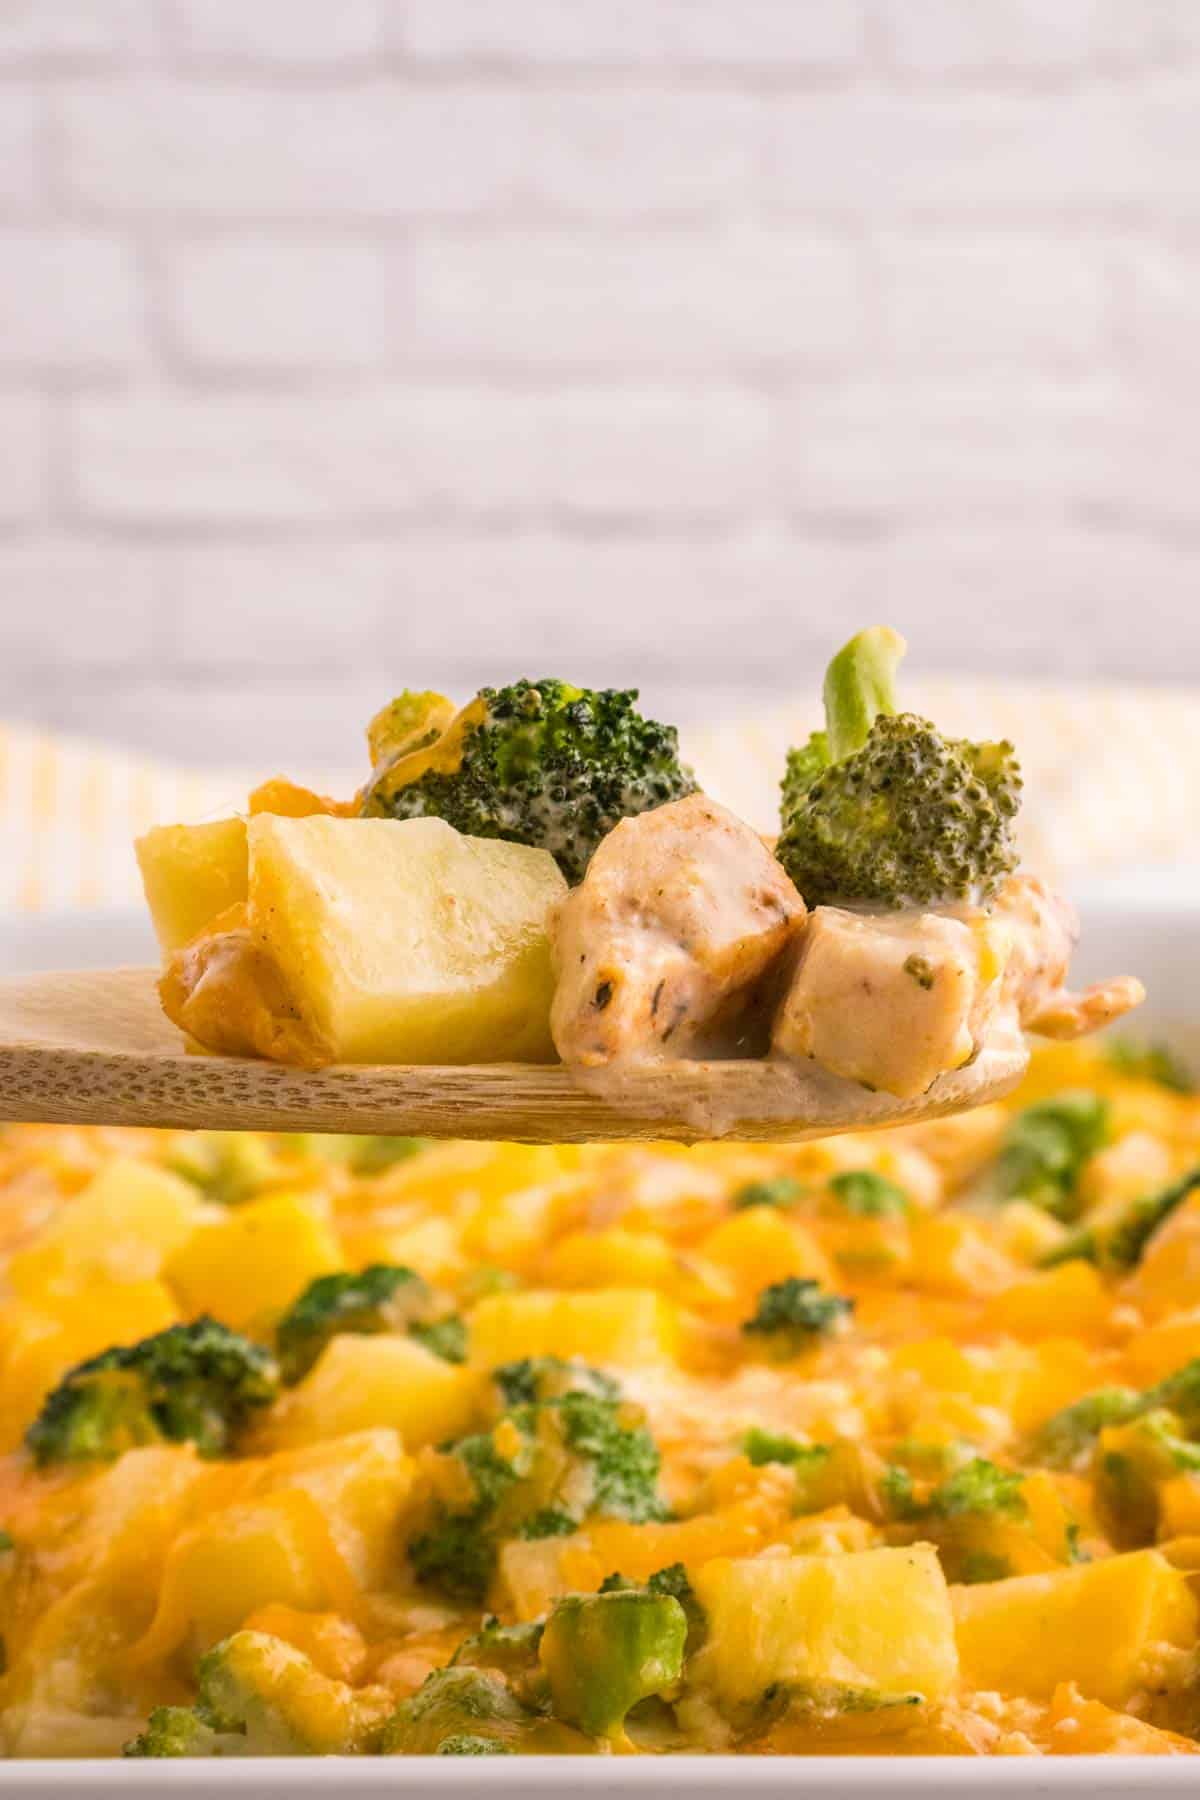 Chicken Broccoli Potato Casserole is a hearty dish loaded with chicken breast chunks, cubed potatoes and broccoli florets all in a creamy sauce and baked with cheese on top.